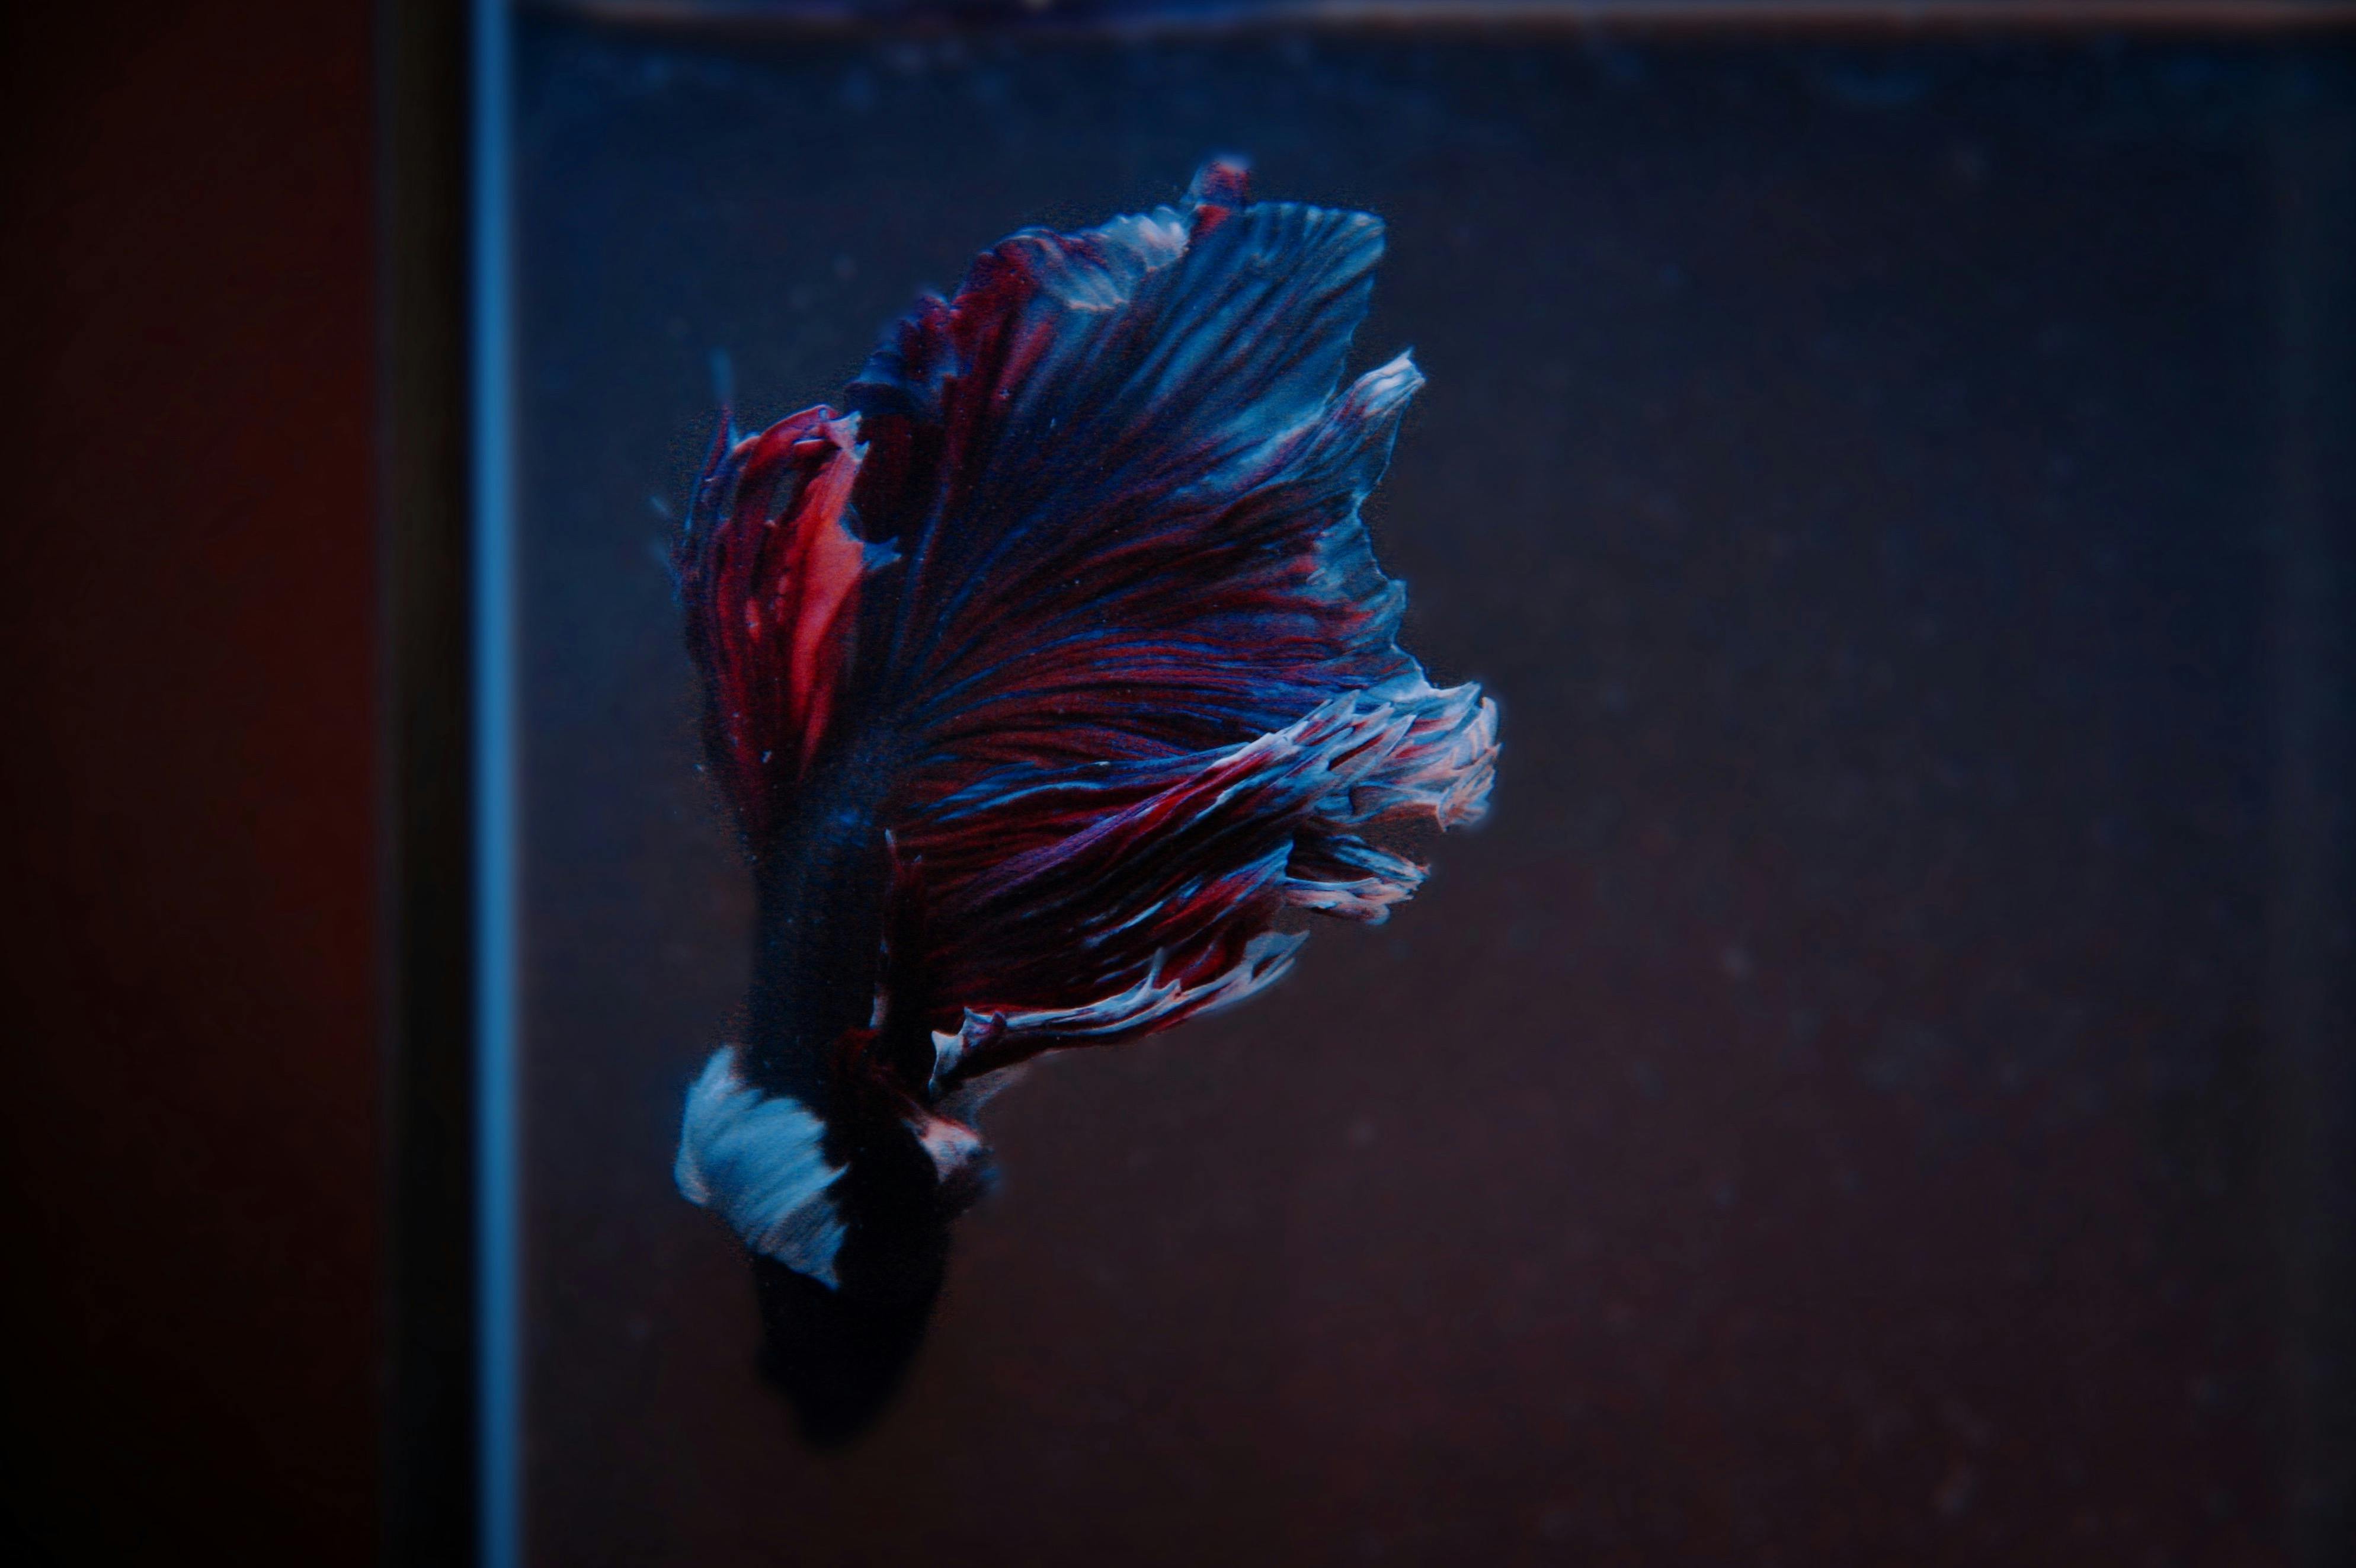 Blue And Red Fighter Fish Swimming In An Aquarium Background Picture Of  Female Betta Fish Background Image And Wallpaper for Free Download